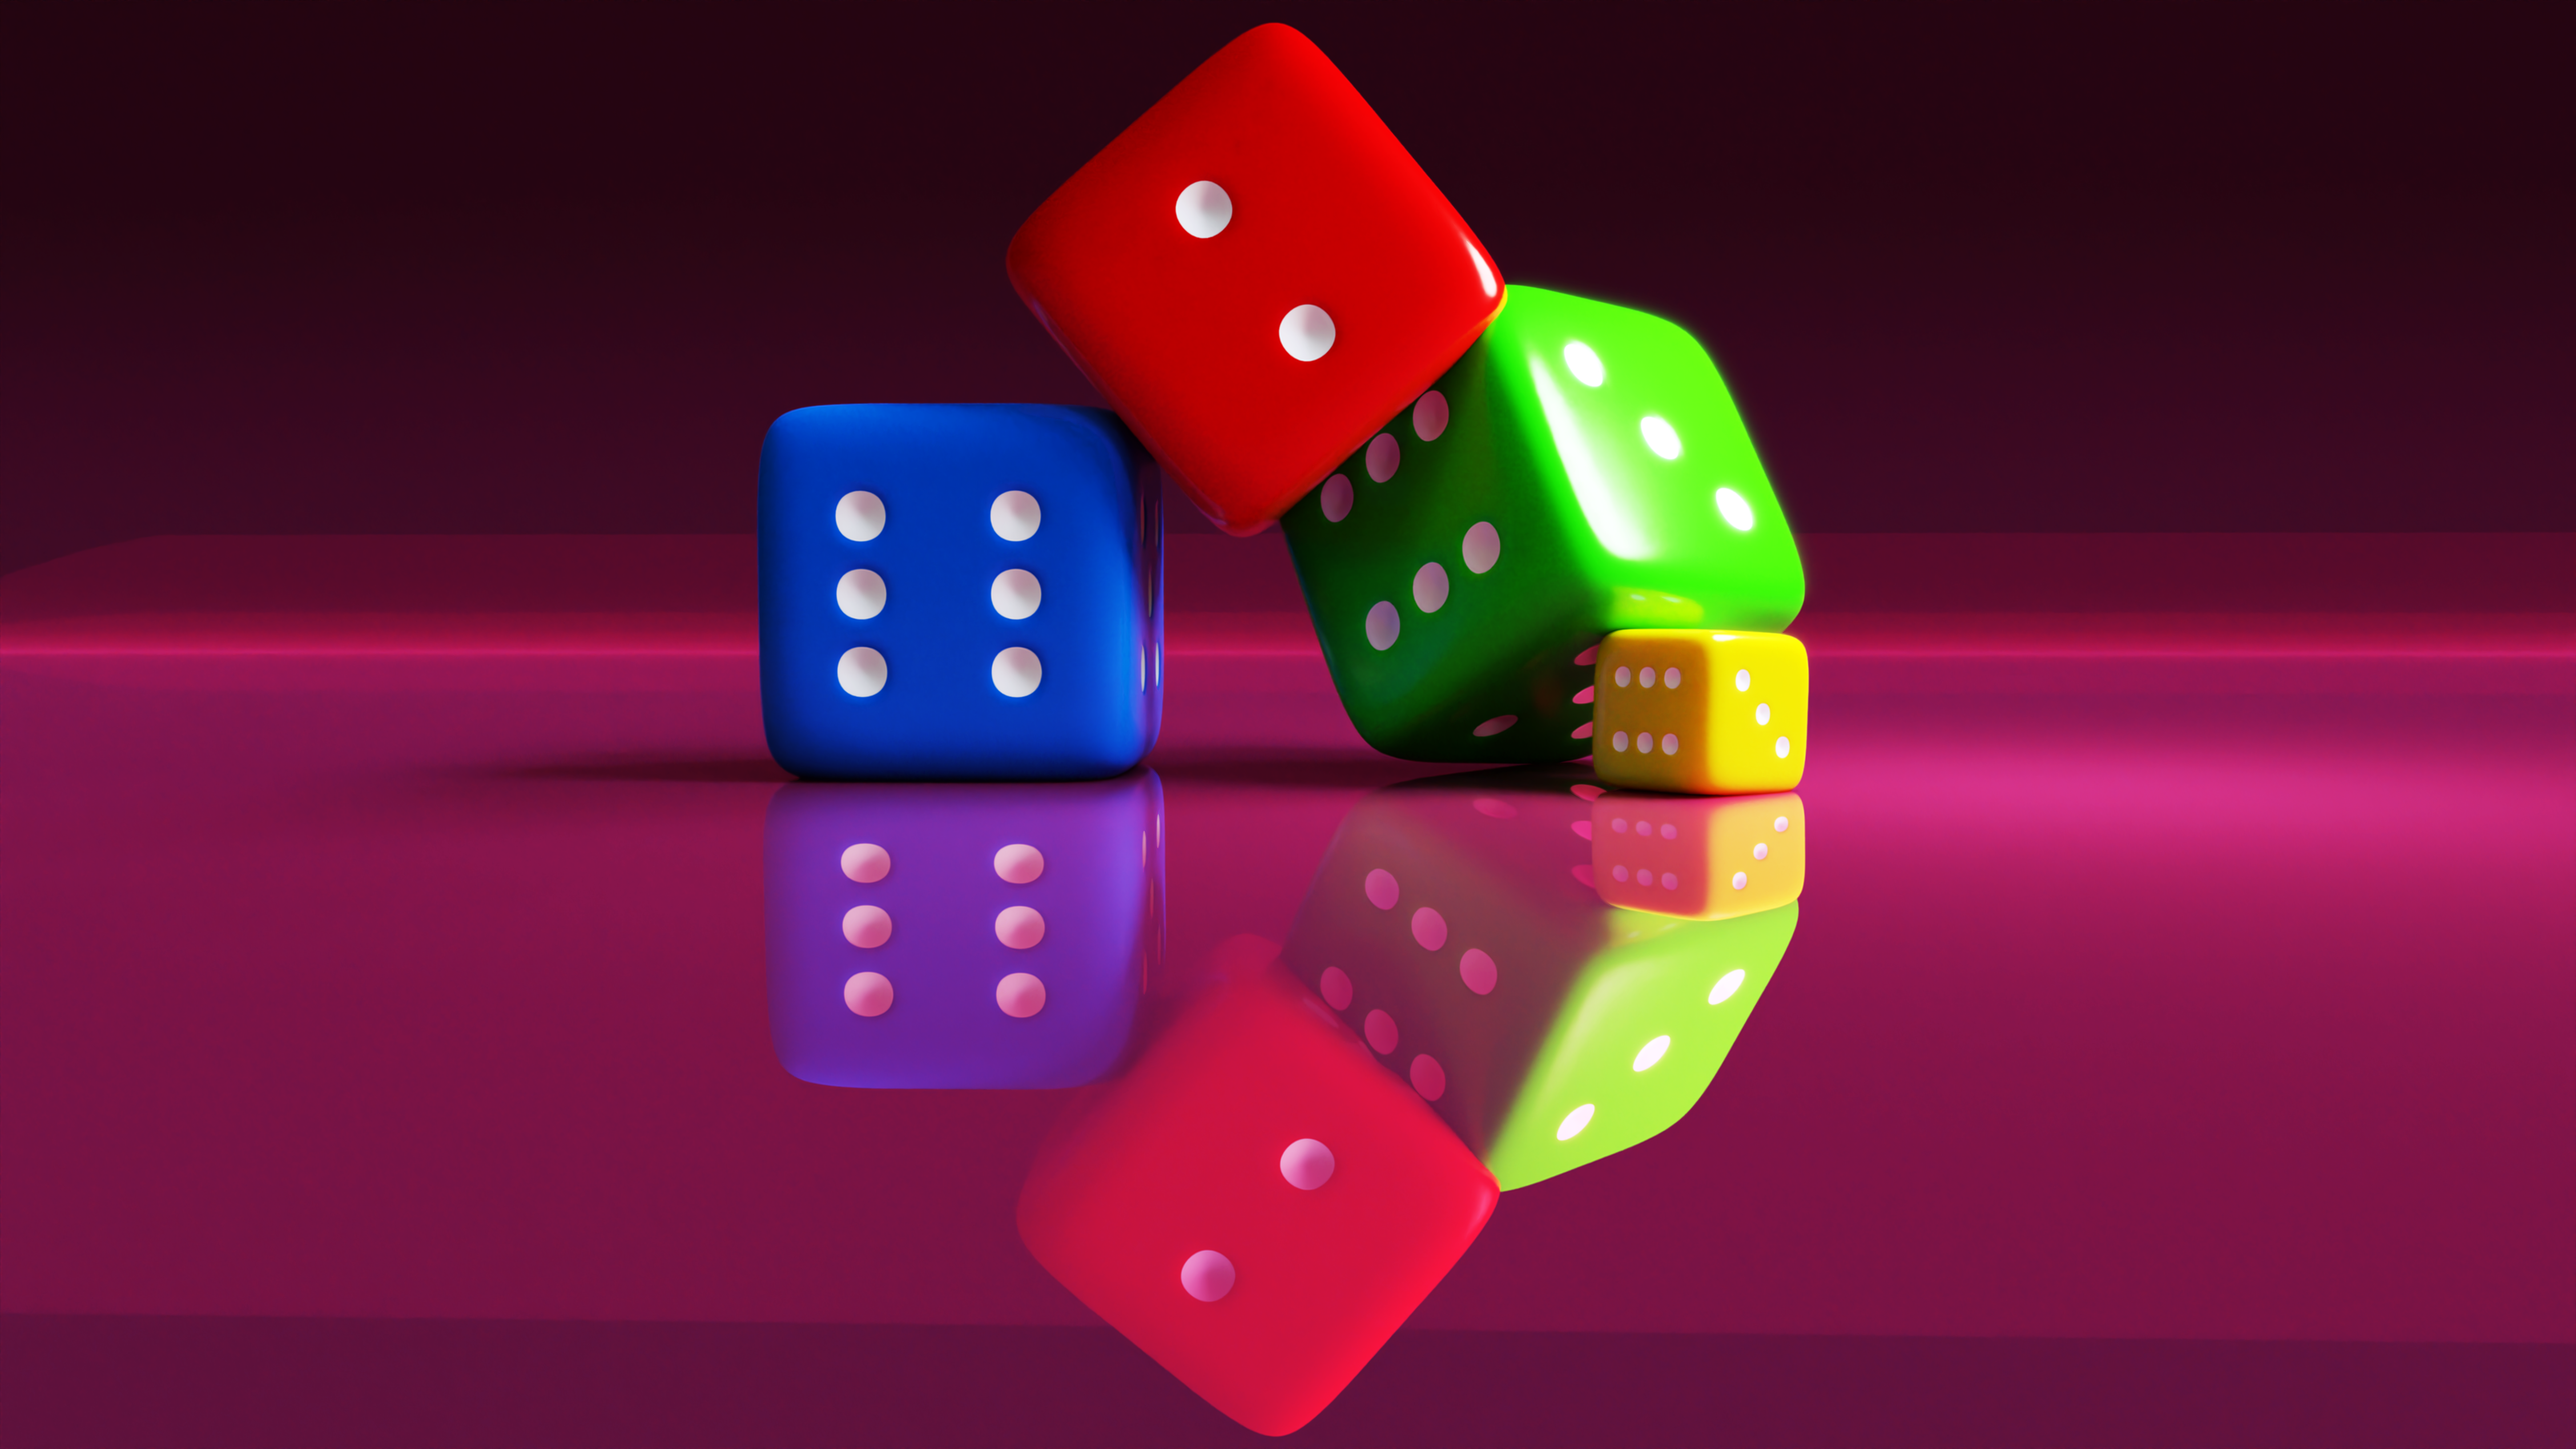 General 4512x2538 dice 3D 3D Abstract Blender minimalism simple background dots reflection